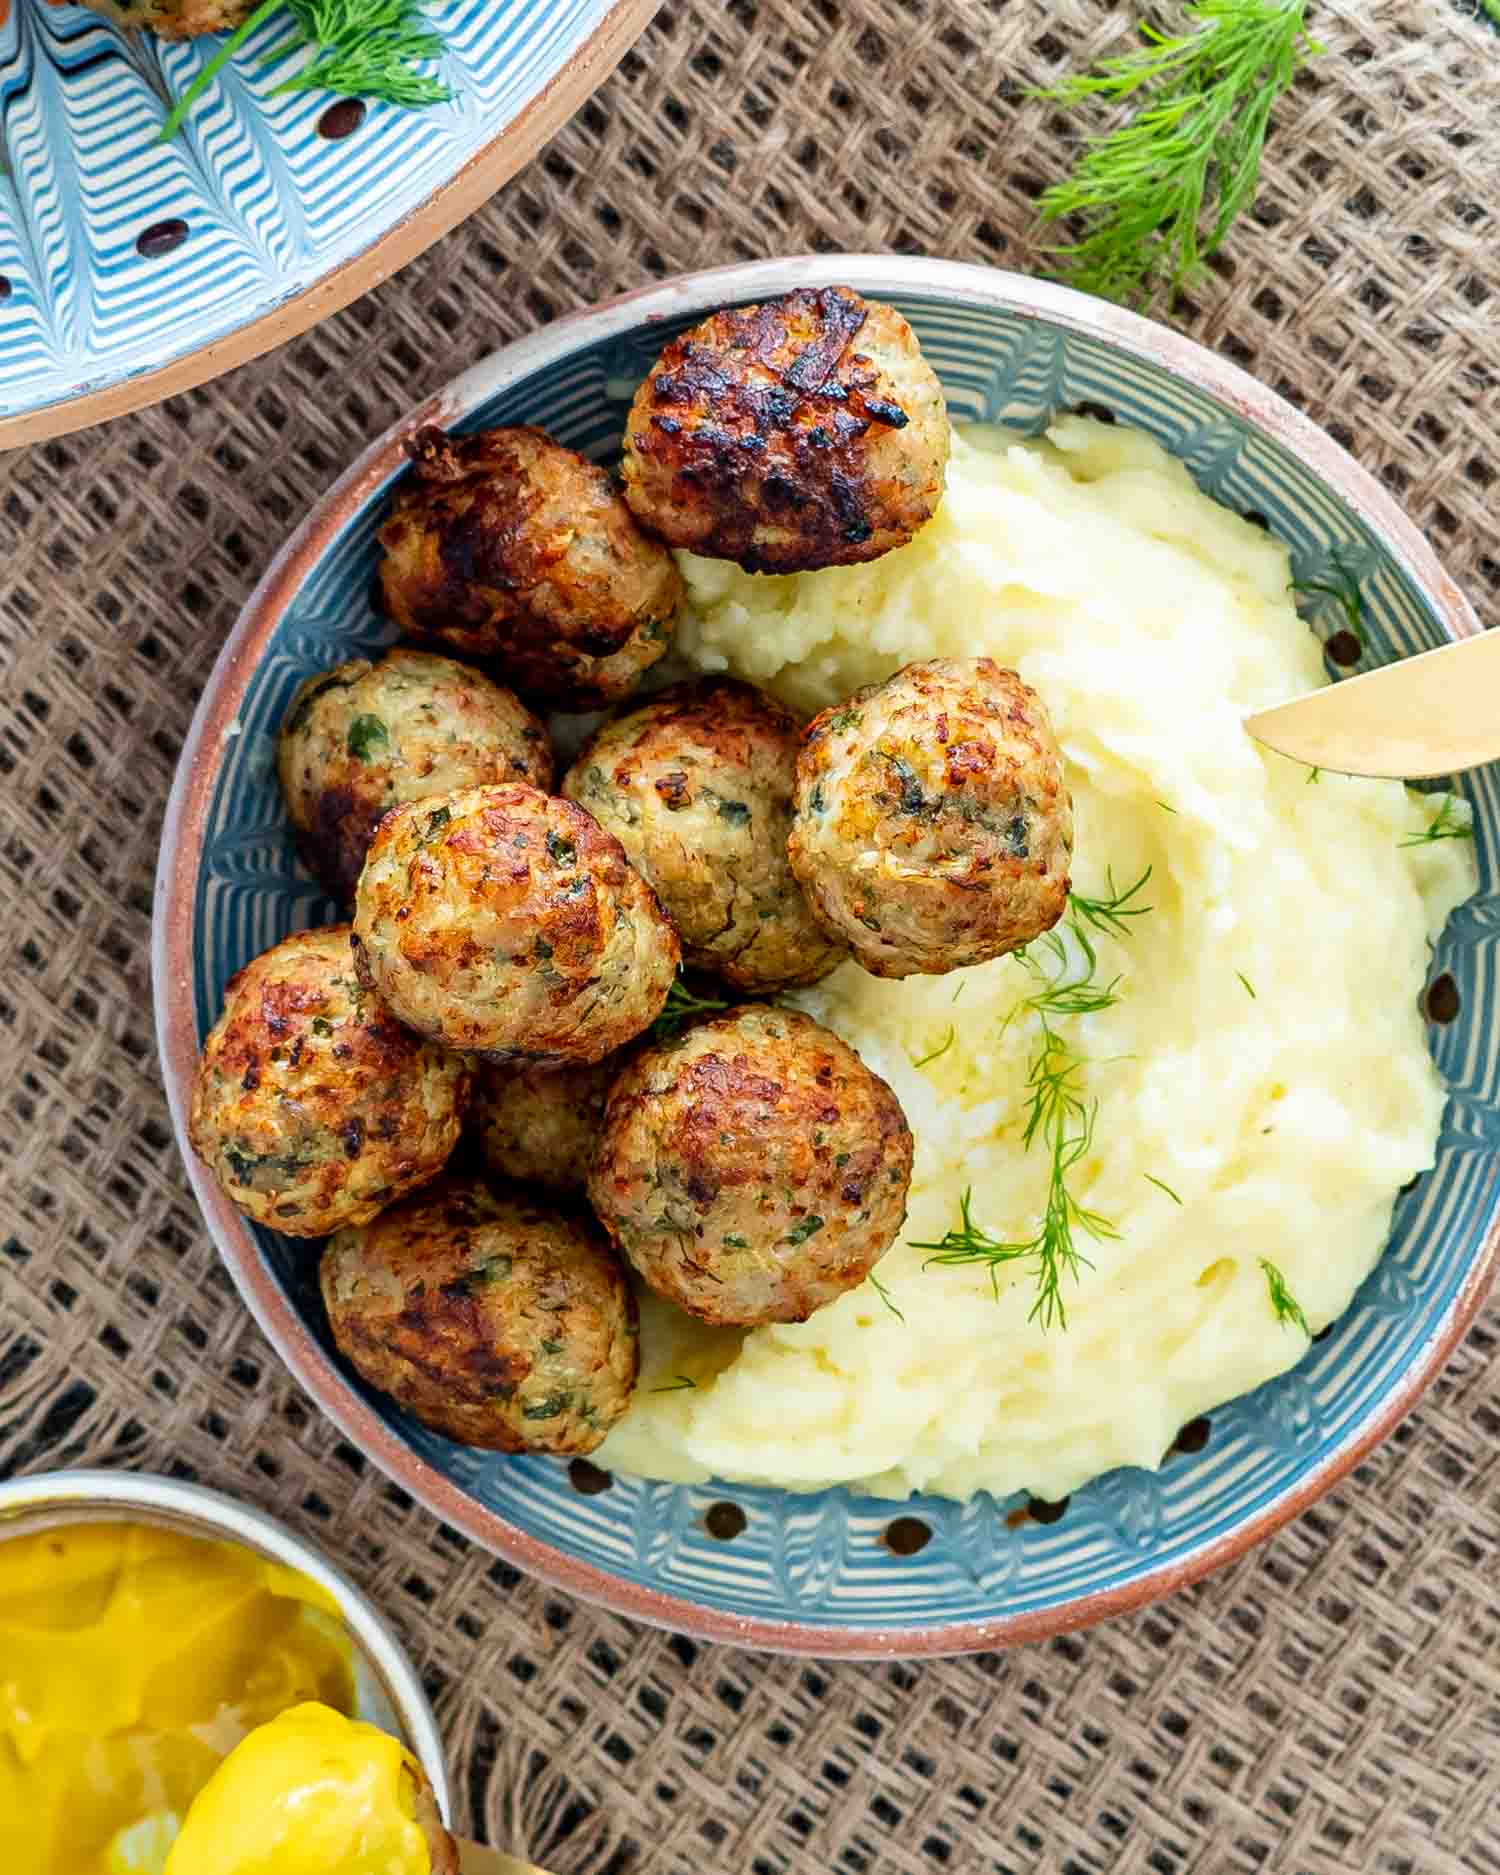 Romanian meatballs with mashed potatoes in a clay plate garnished with dill.